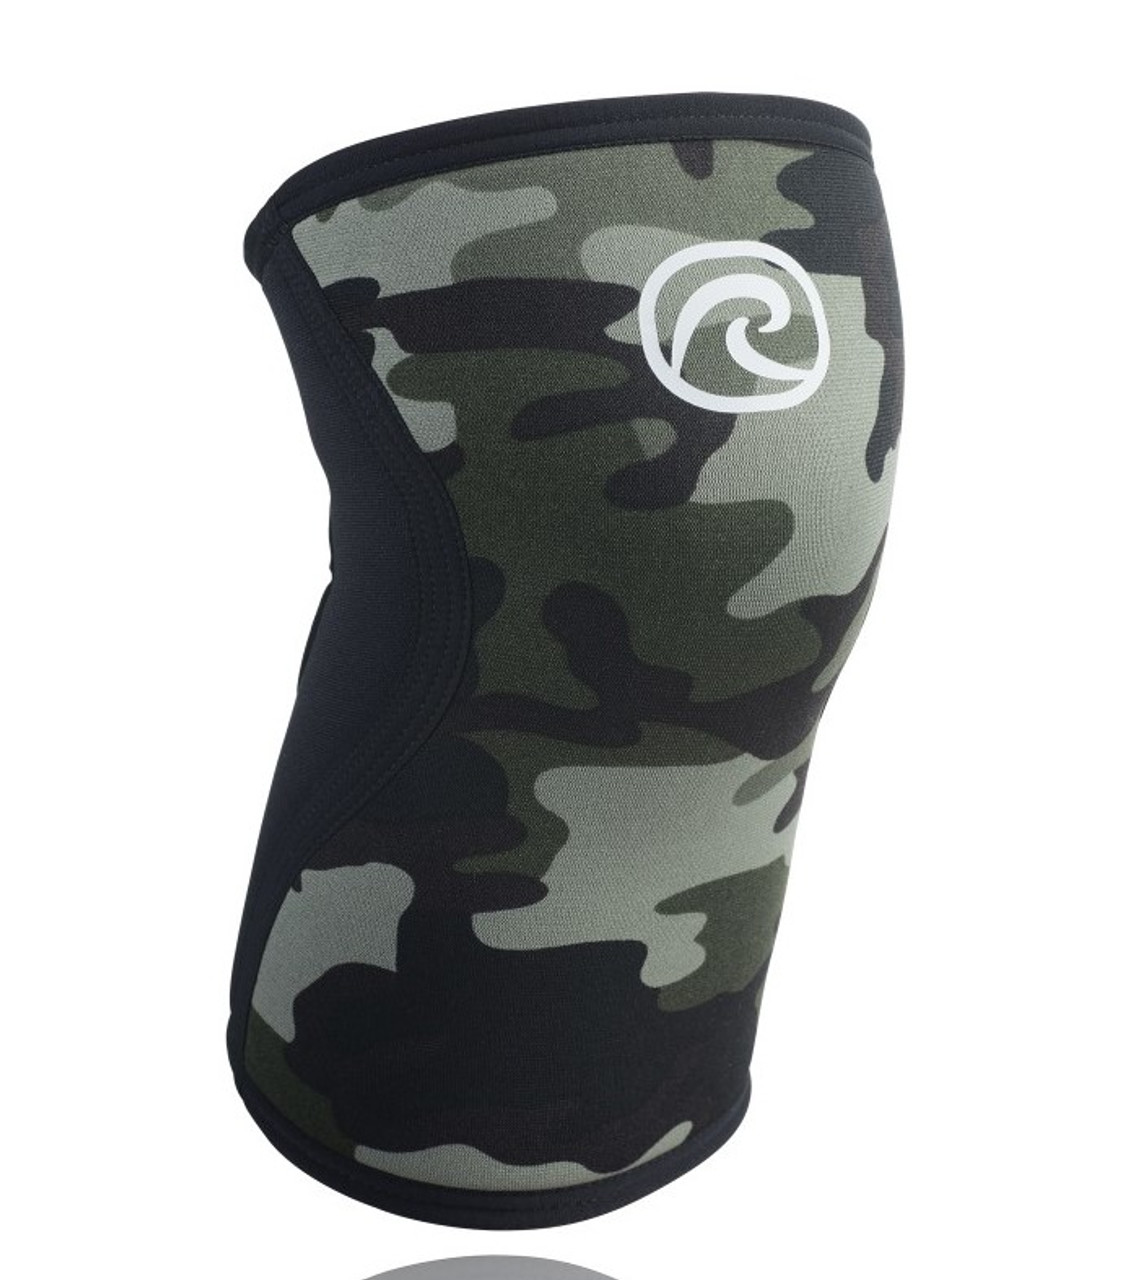 Large Camo Cross T Expand Your Movement Rehband Rx Knee Support 7751 5mm 